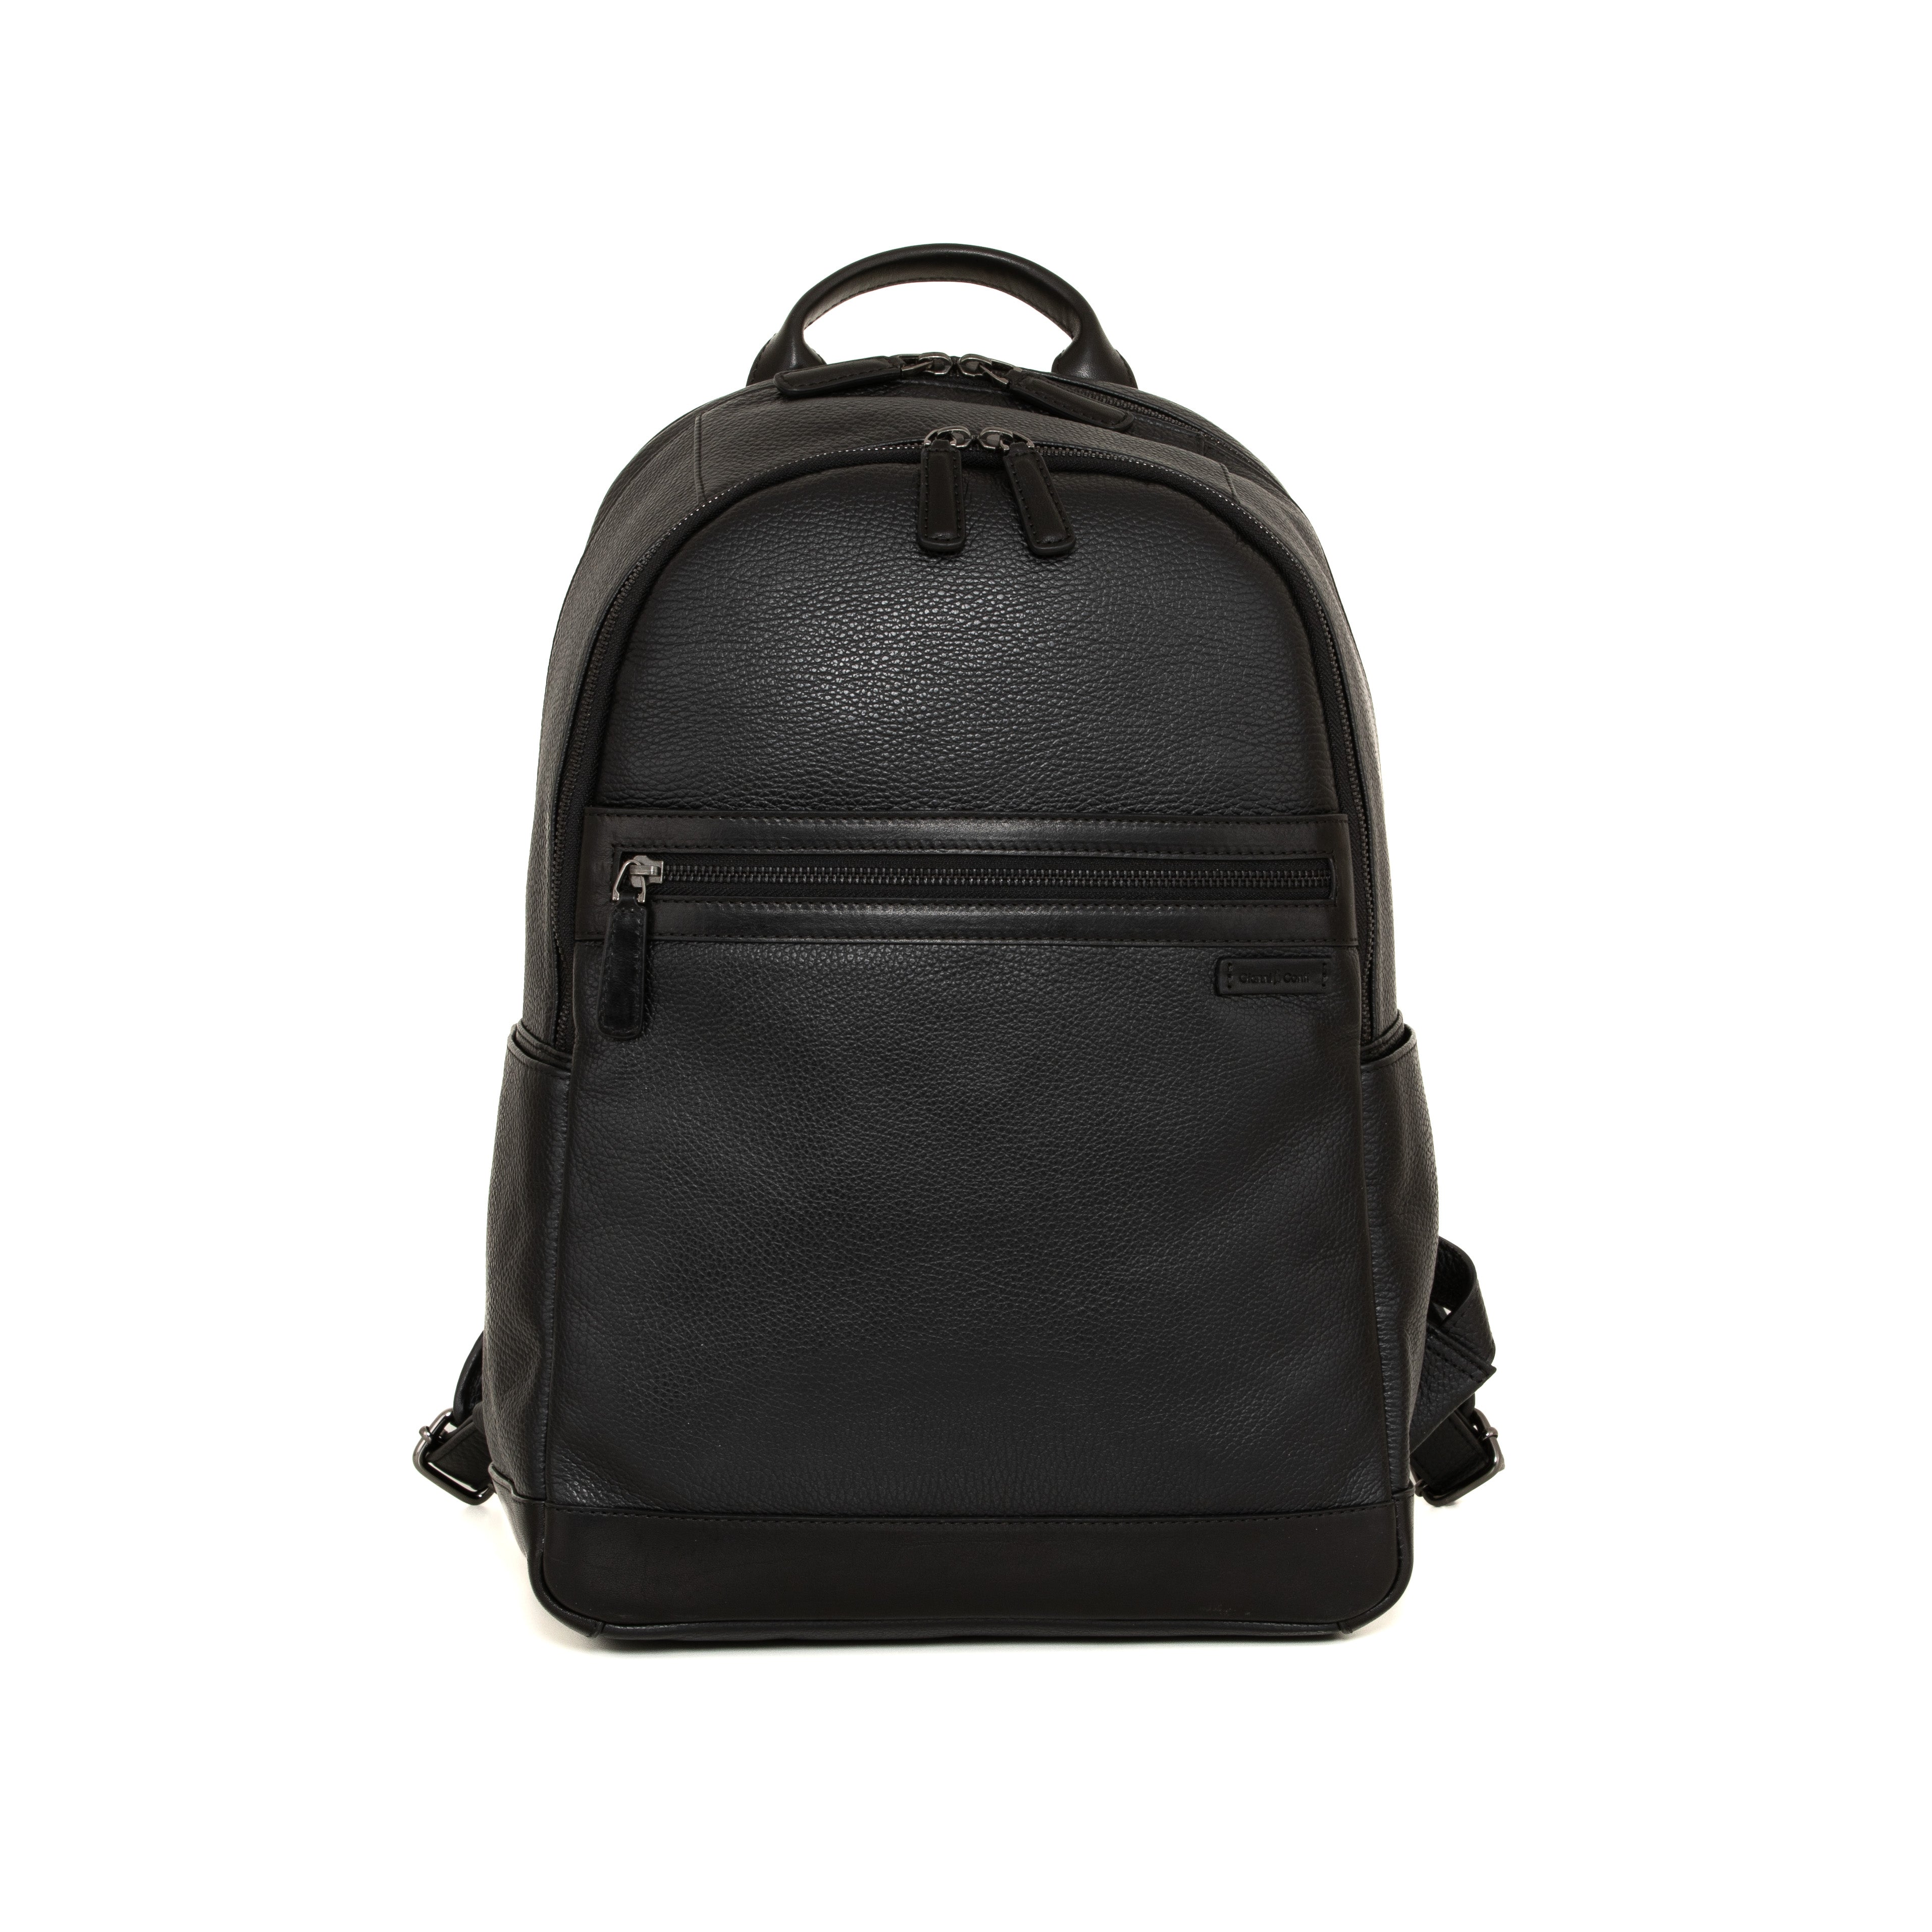 Orion Black Leather PC Backpack by Gianni Conti